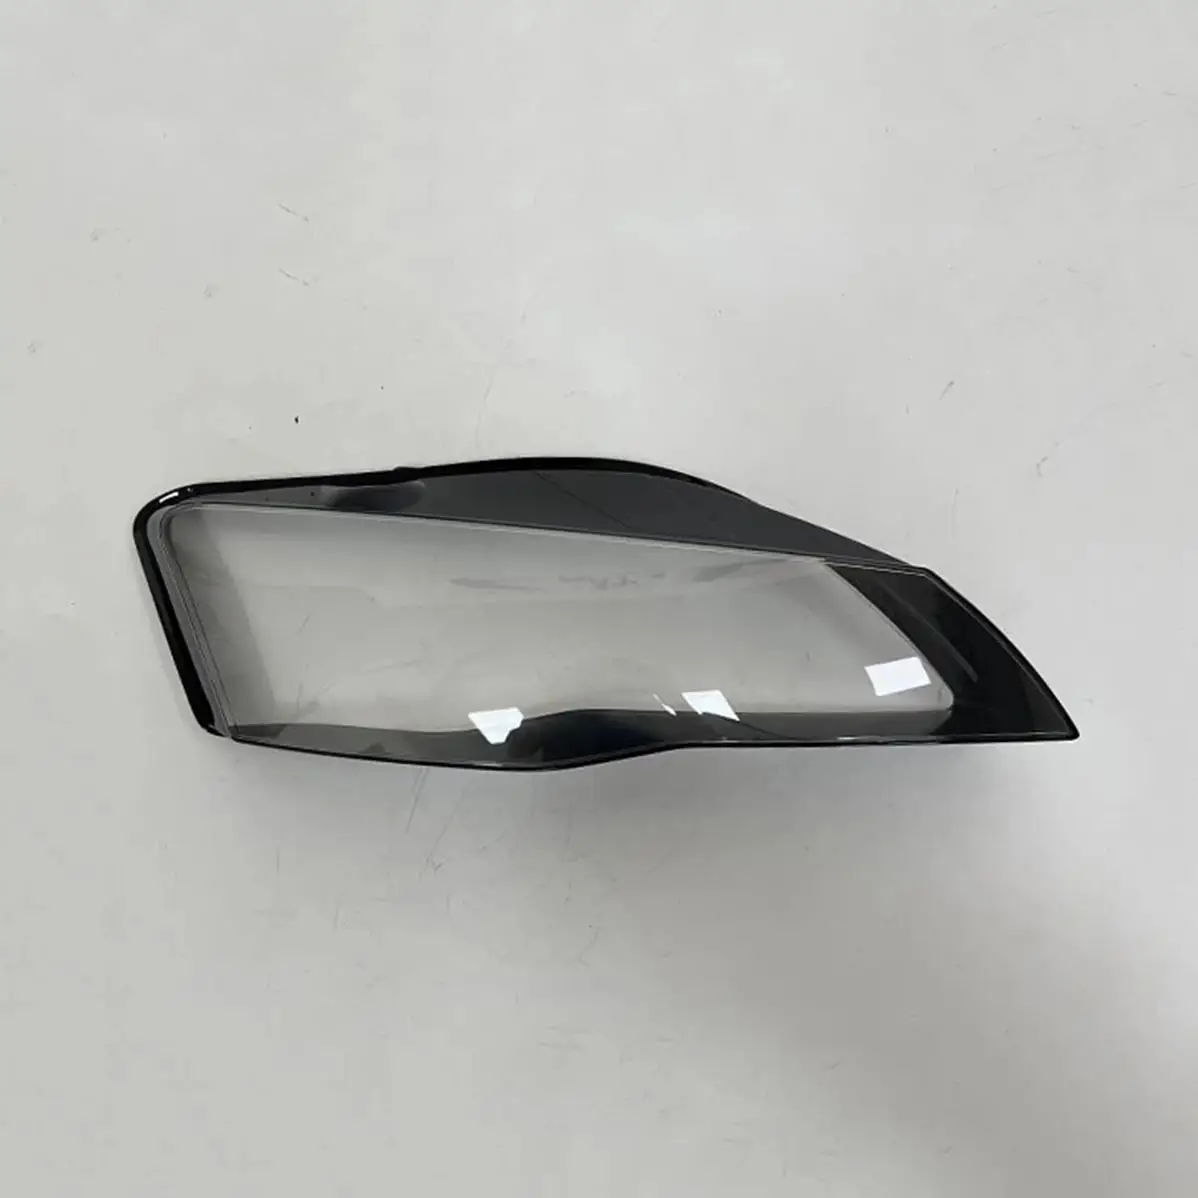 

A PairCar Front Glass Lens Lamp Shade Shell For Audi R8 2007-2015 Headlamp Transparent Lampcover Auto Light Case Headlight Cover